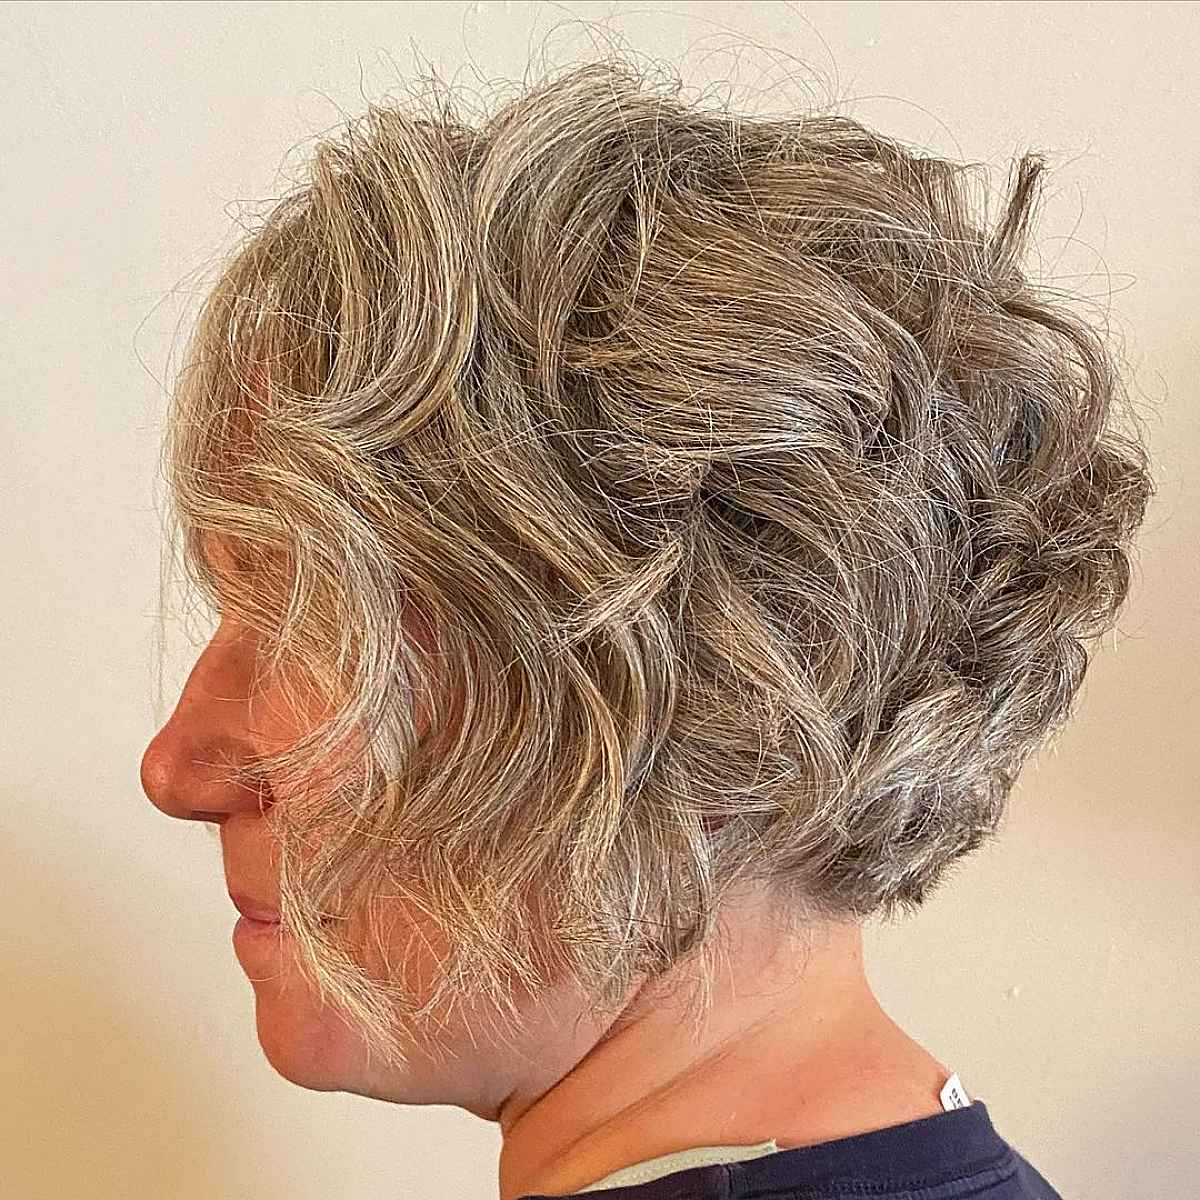 Tousled Layered Hairstyle on Women's Short Silver Hair